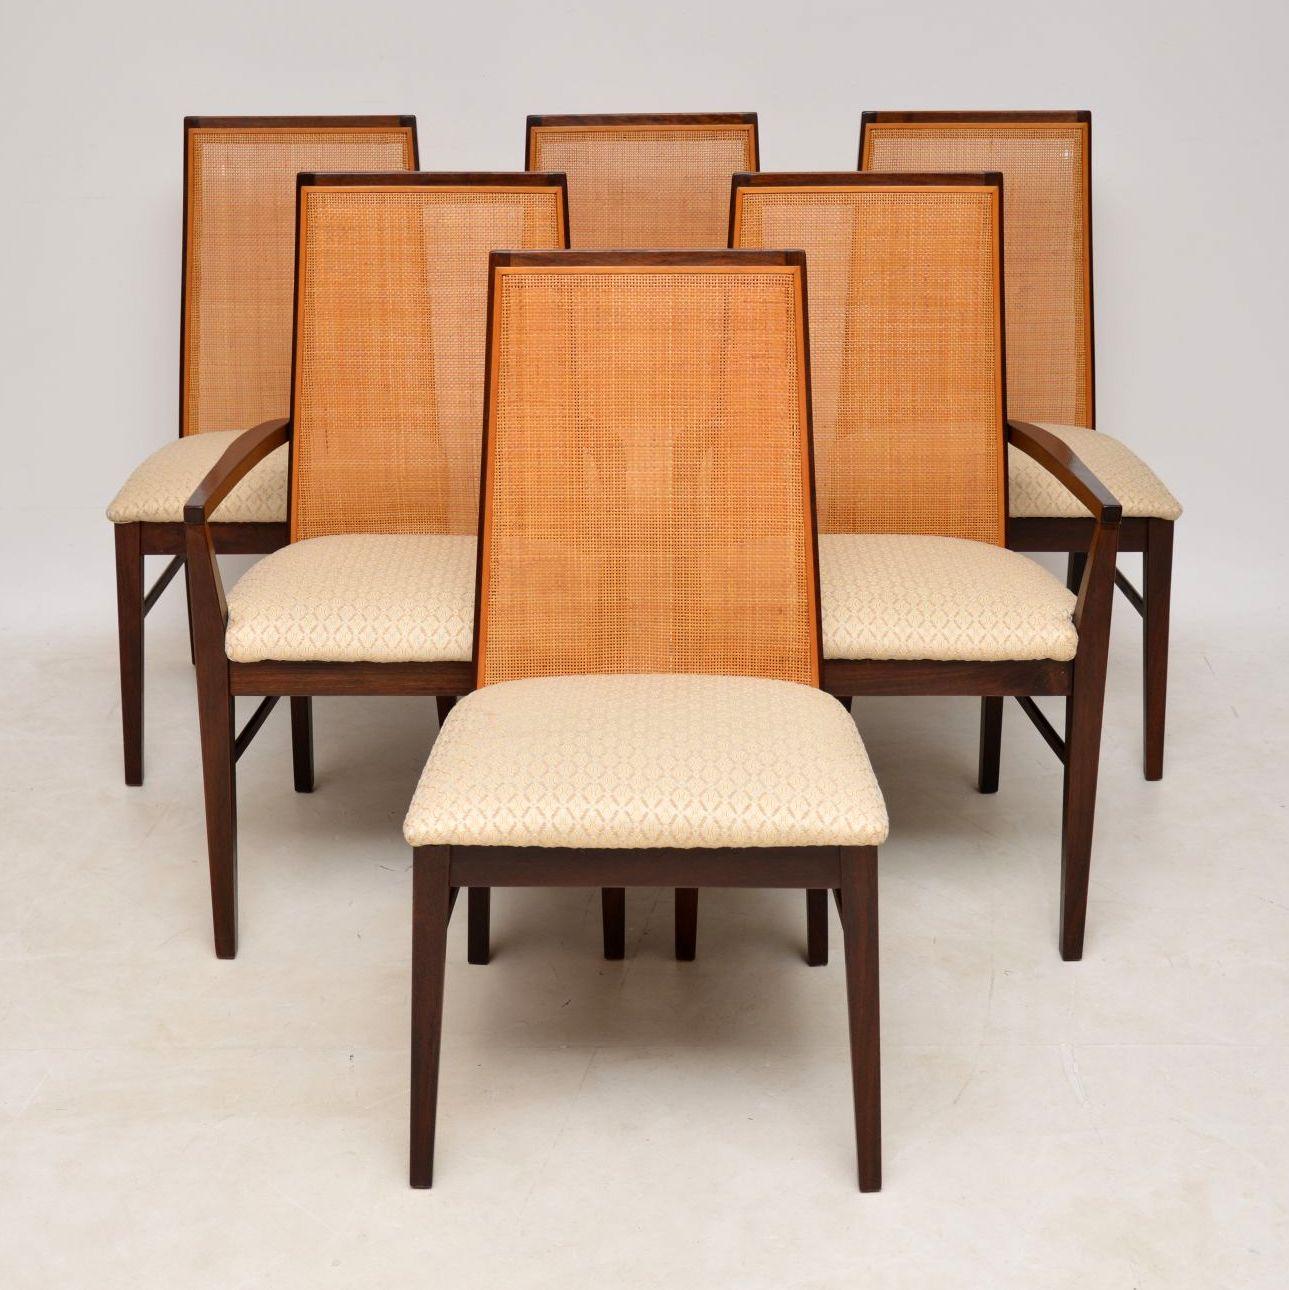 A beautiful and very comfortable set of six wood dining chairs, these were made in Denmark by Dyrlund, they date from the 1960-1970s. They’re in good condition for their age, all the frames are clean, sturdy and sound. The seats were recently